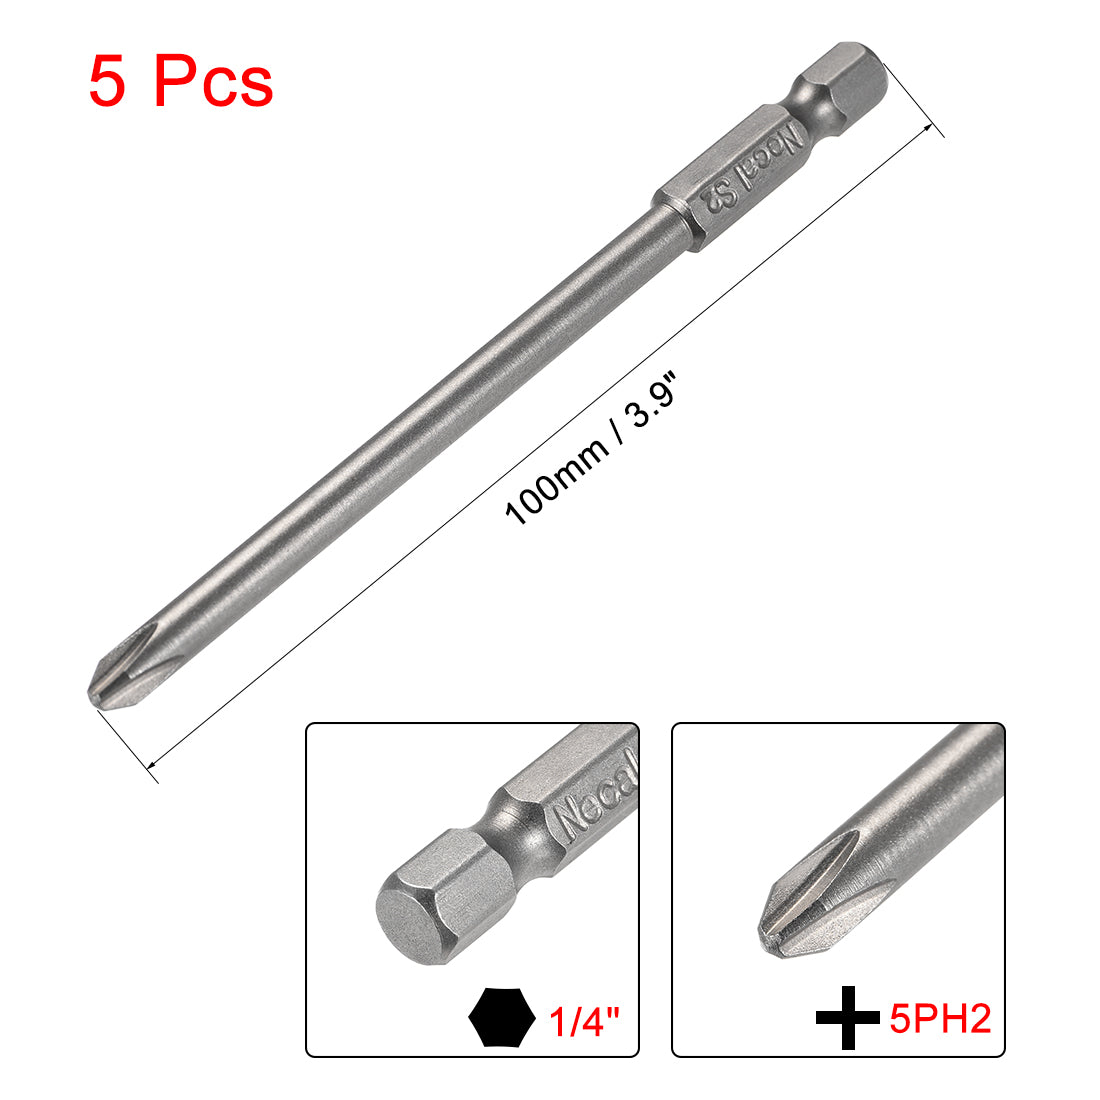 Uxcell Uxcell 1/4-Inch Hex Shank 200mm Length Phillips Cross 6PH2 Magnetic Screw Driver S2 Screwdriver Bits 2pcs